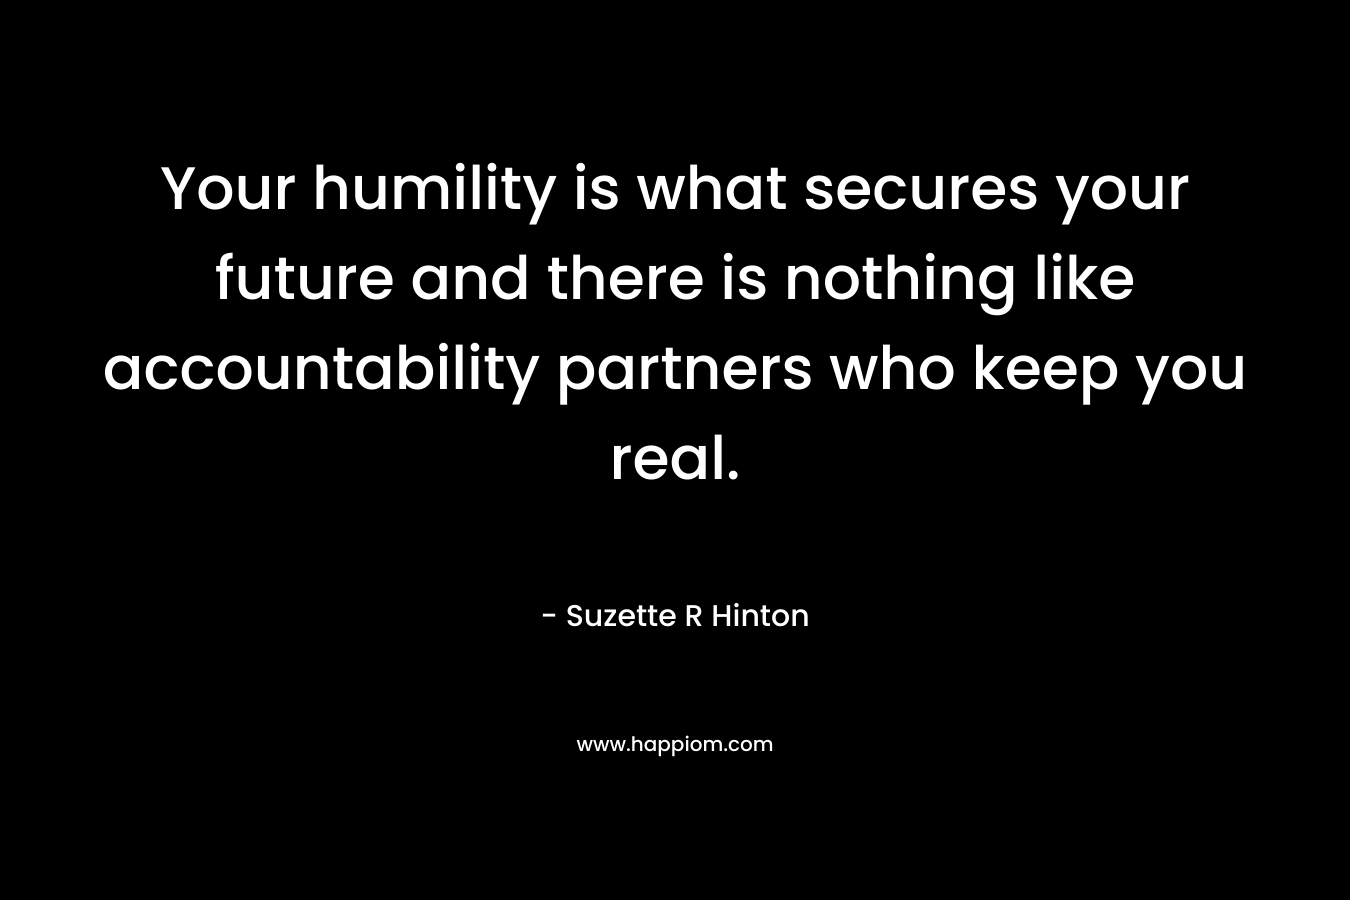 Your humility is what secures your future and there is nothing like accountability partners who keep you real. – Suzette R Hinton